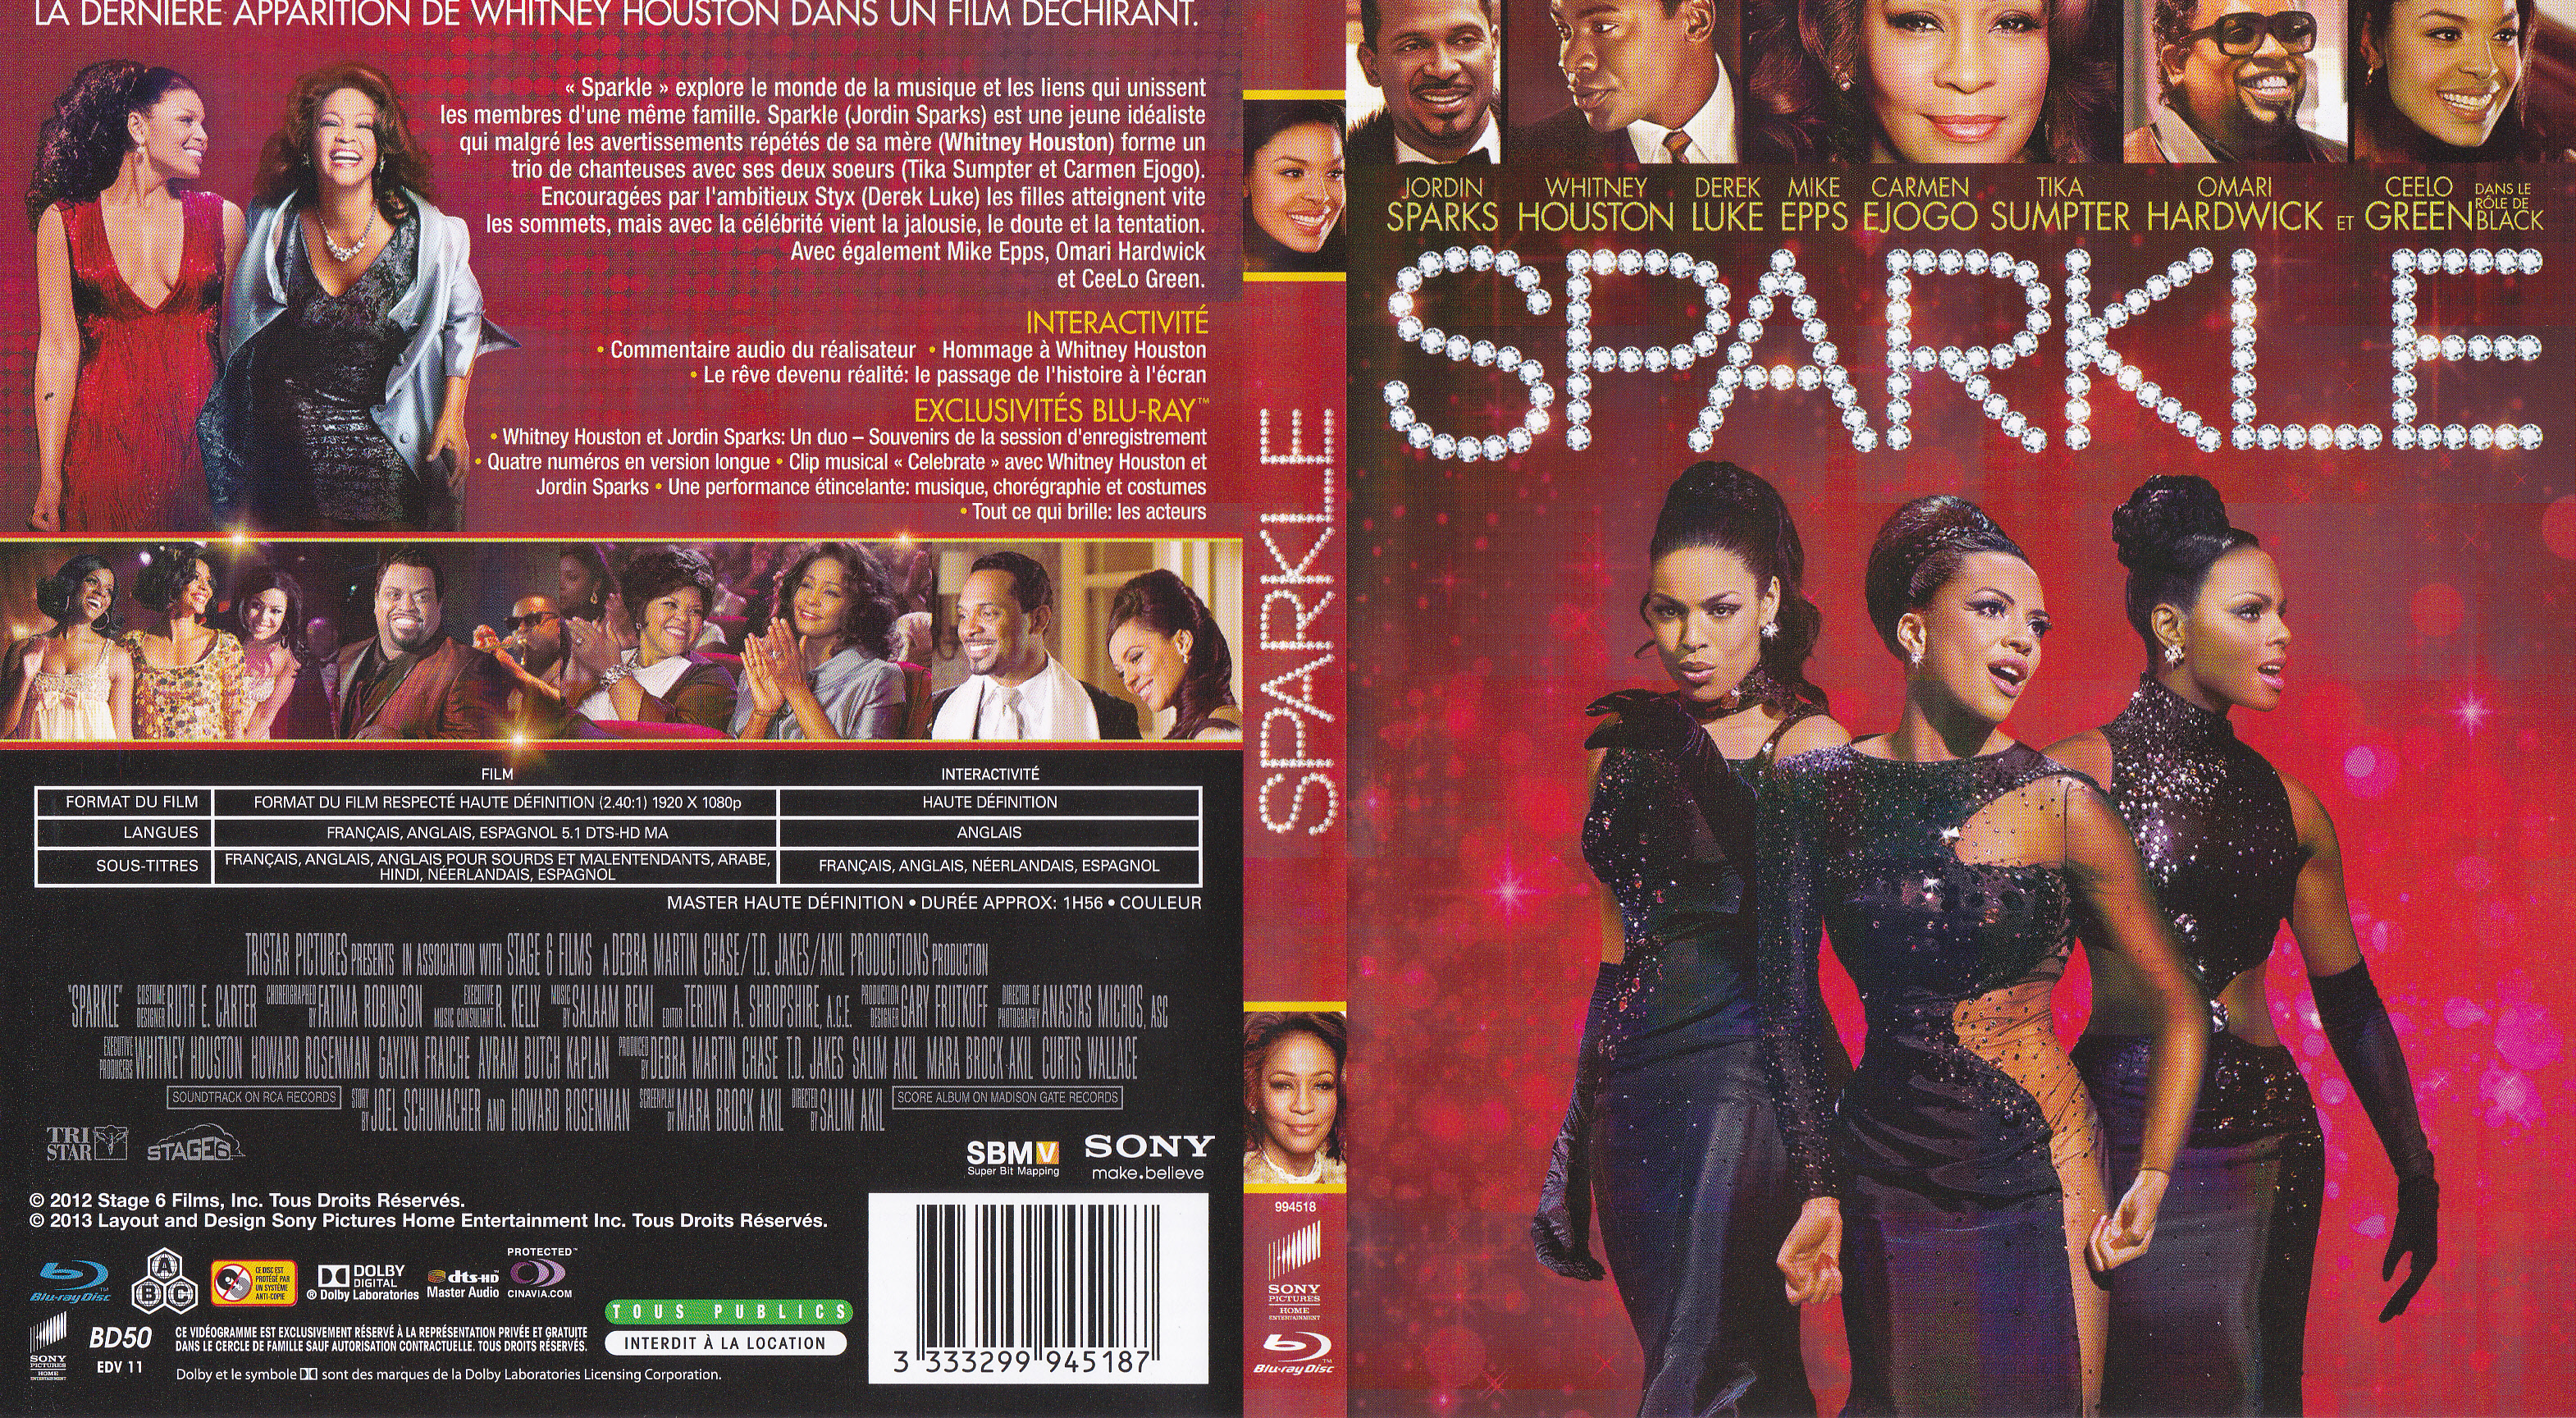 Jaquette DVD Sparkle (BLU-RAY)